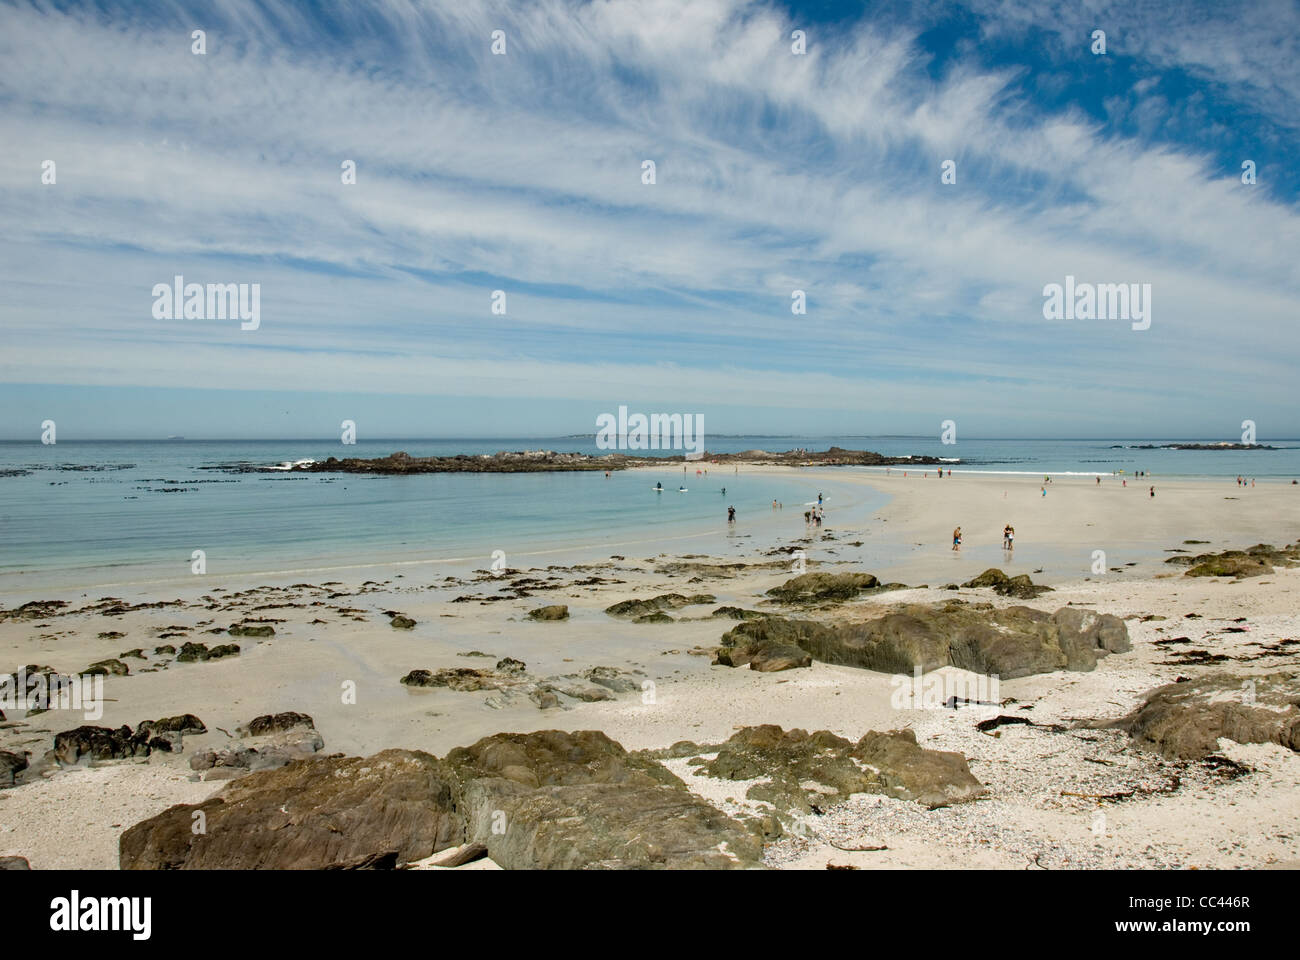 Beautiful scenic ocean view at big bay, Cape Town. Stock Photo